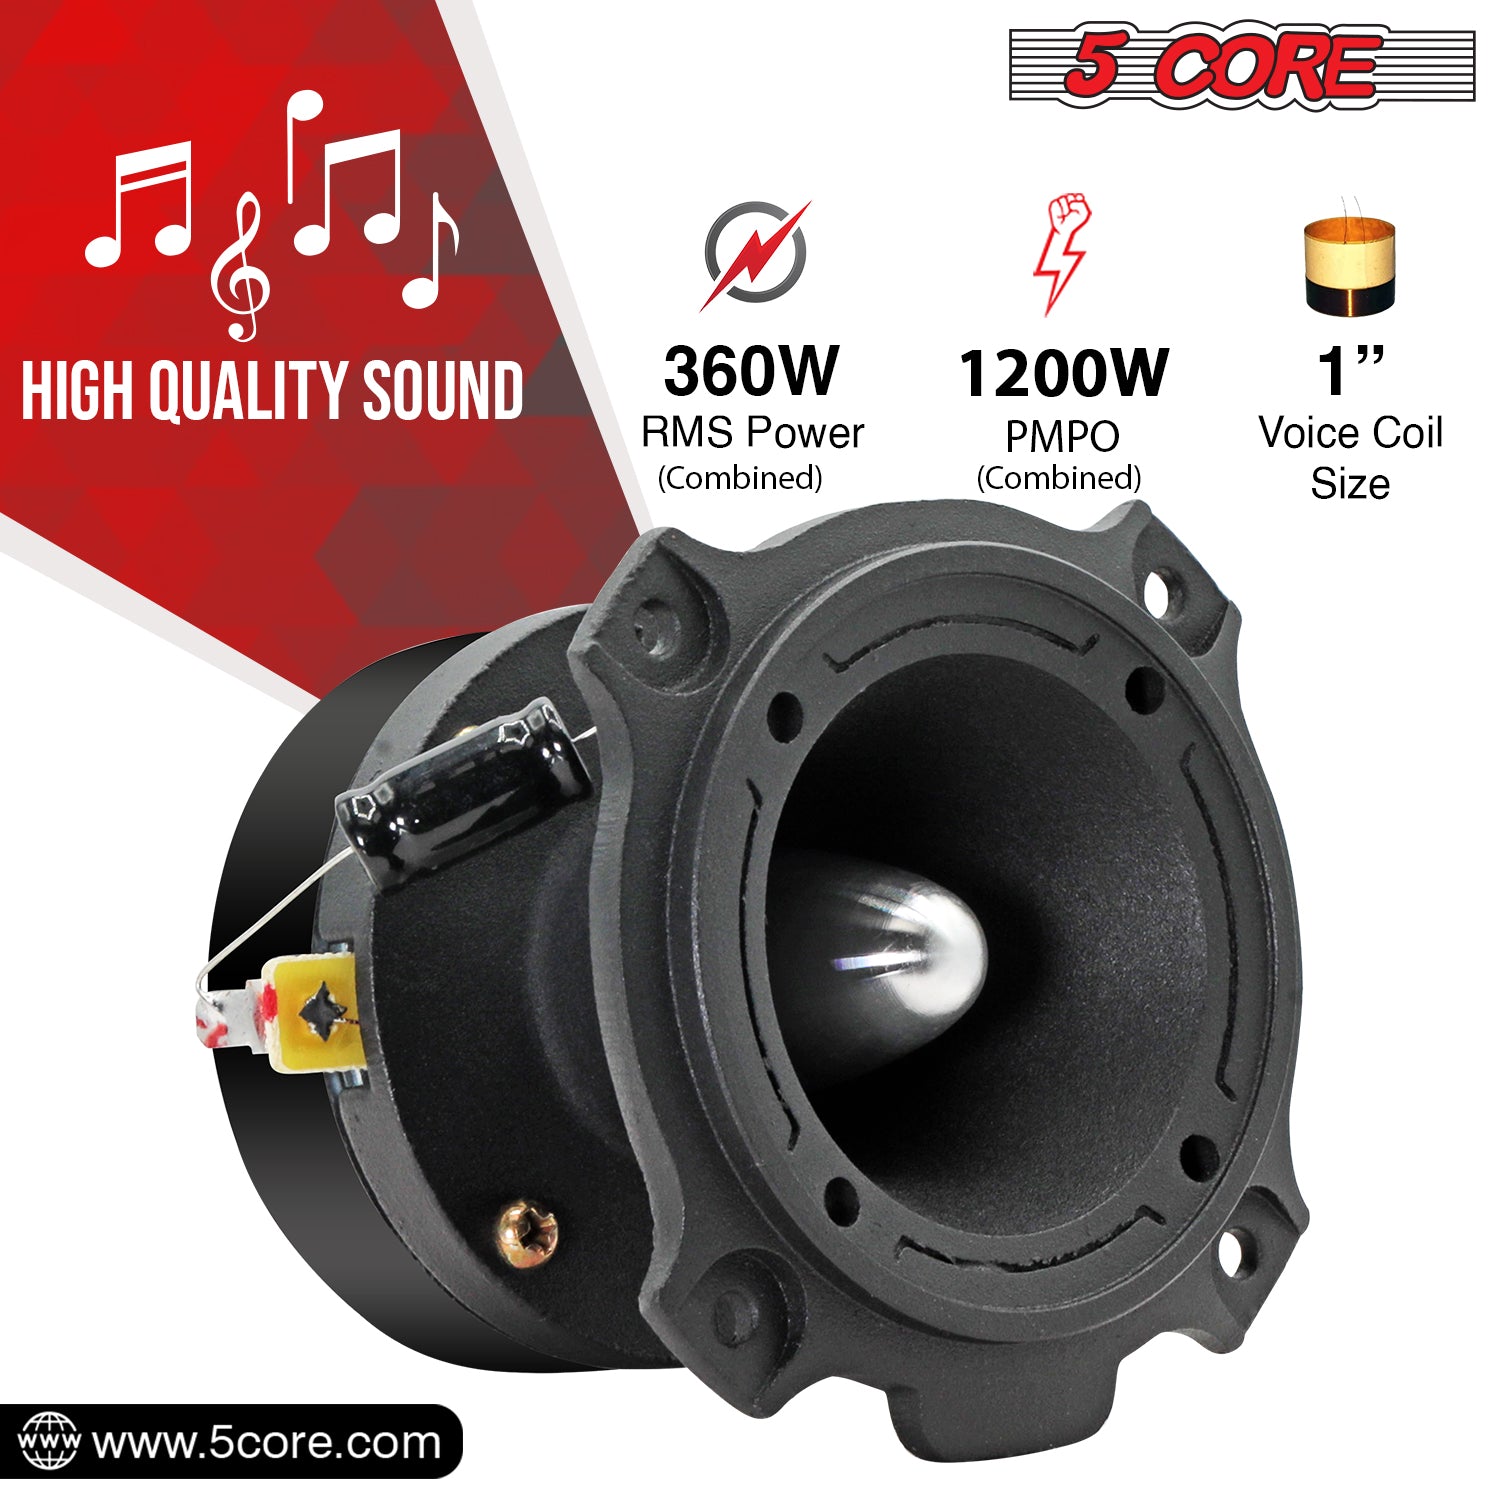 5 Core Super Bullet Tweeters deliver 360W RMS and 600W Max power for outstanding audio output and clarity.